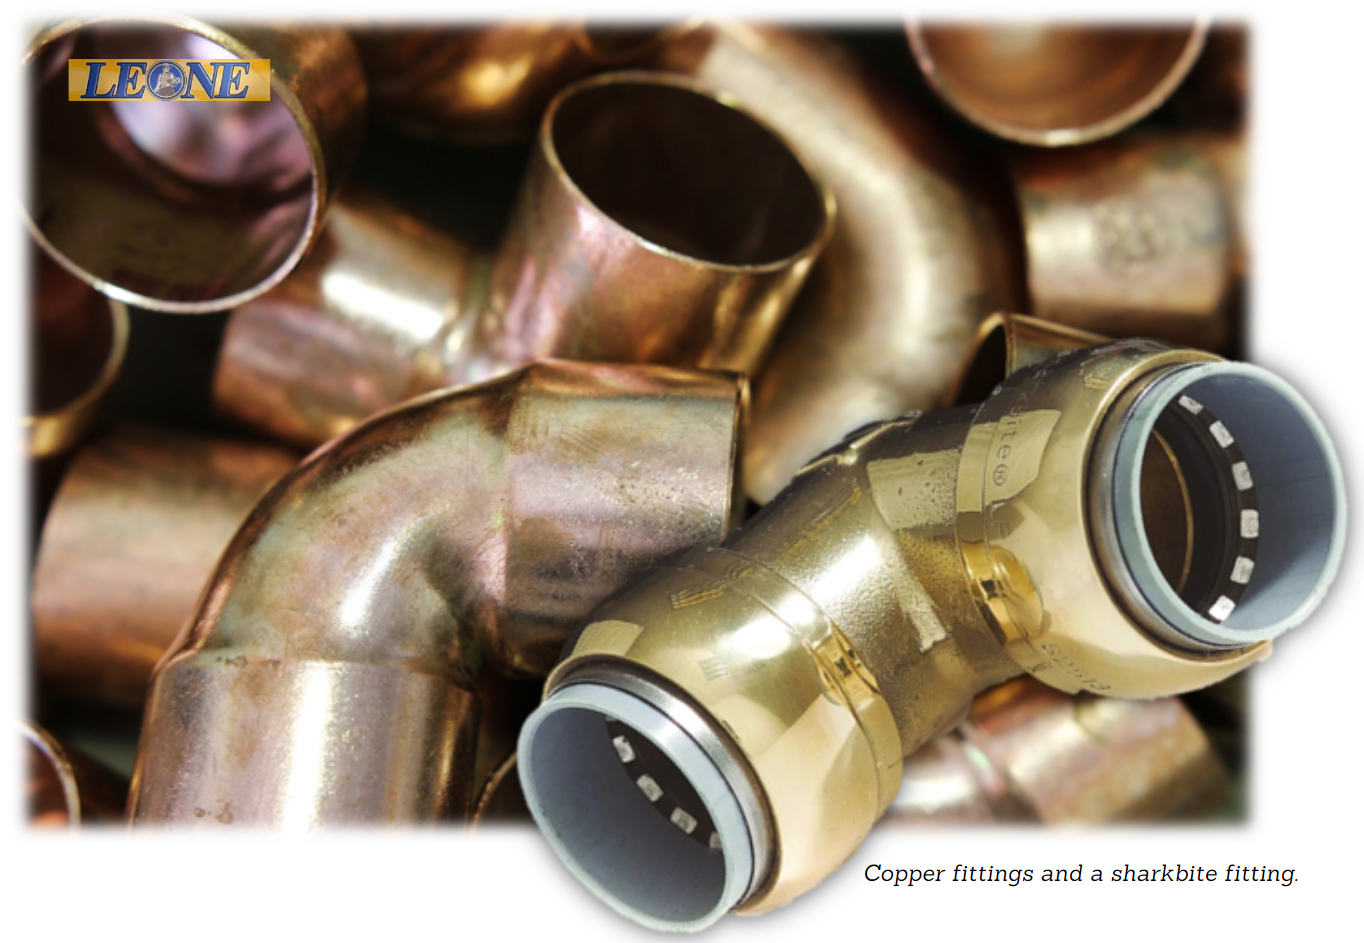 Advantages and disadvantages of using brass pipe fittings over